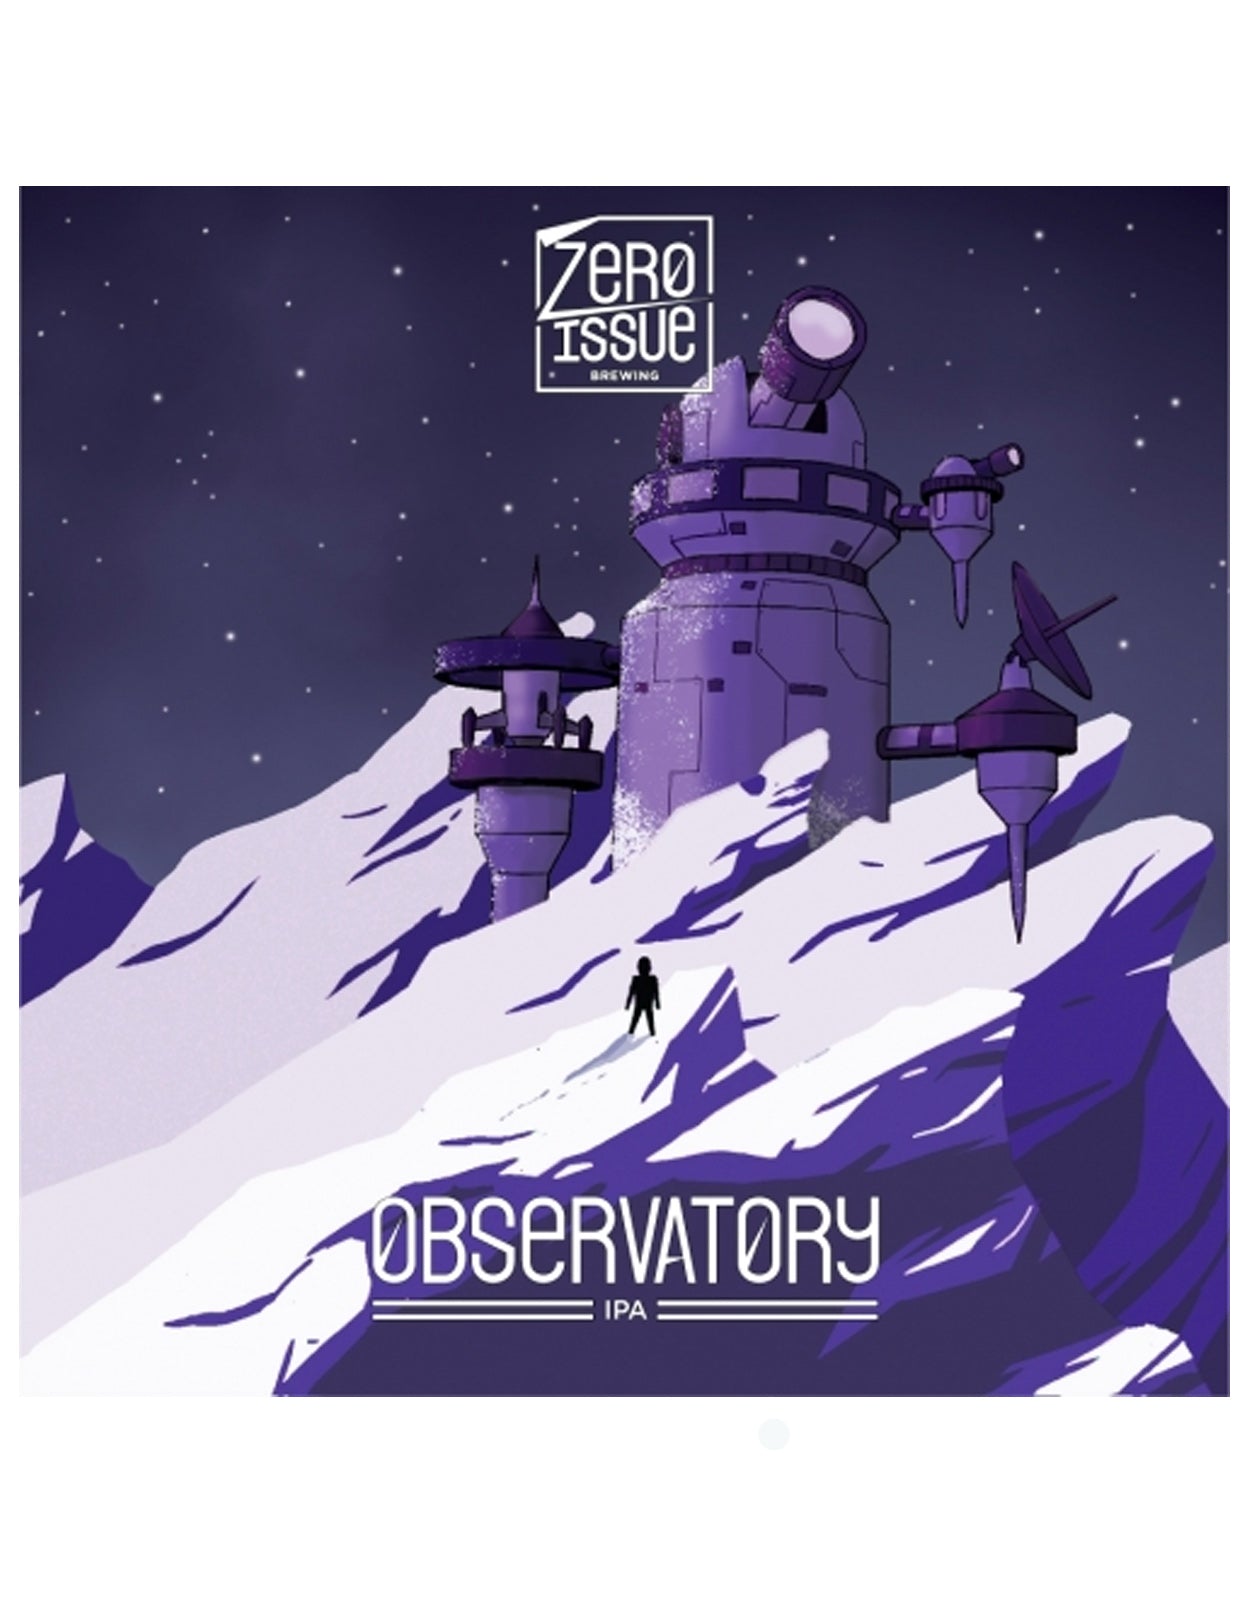 Zero Issue Observatory IPA 473 ml - 4 Cans